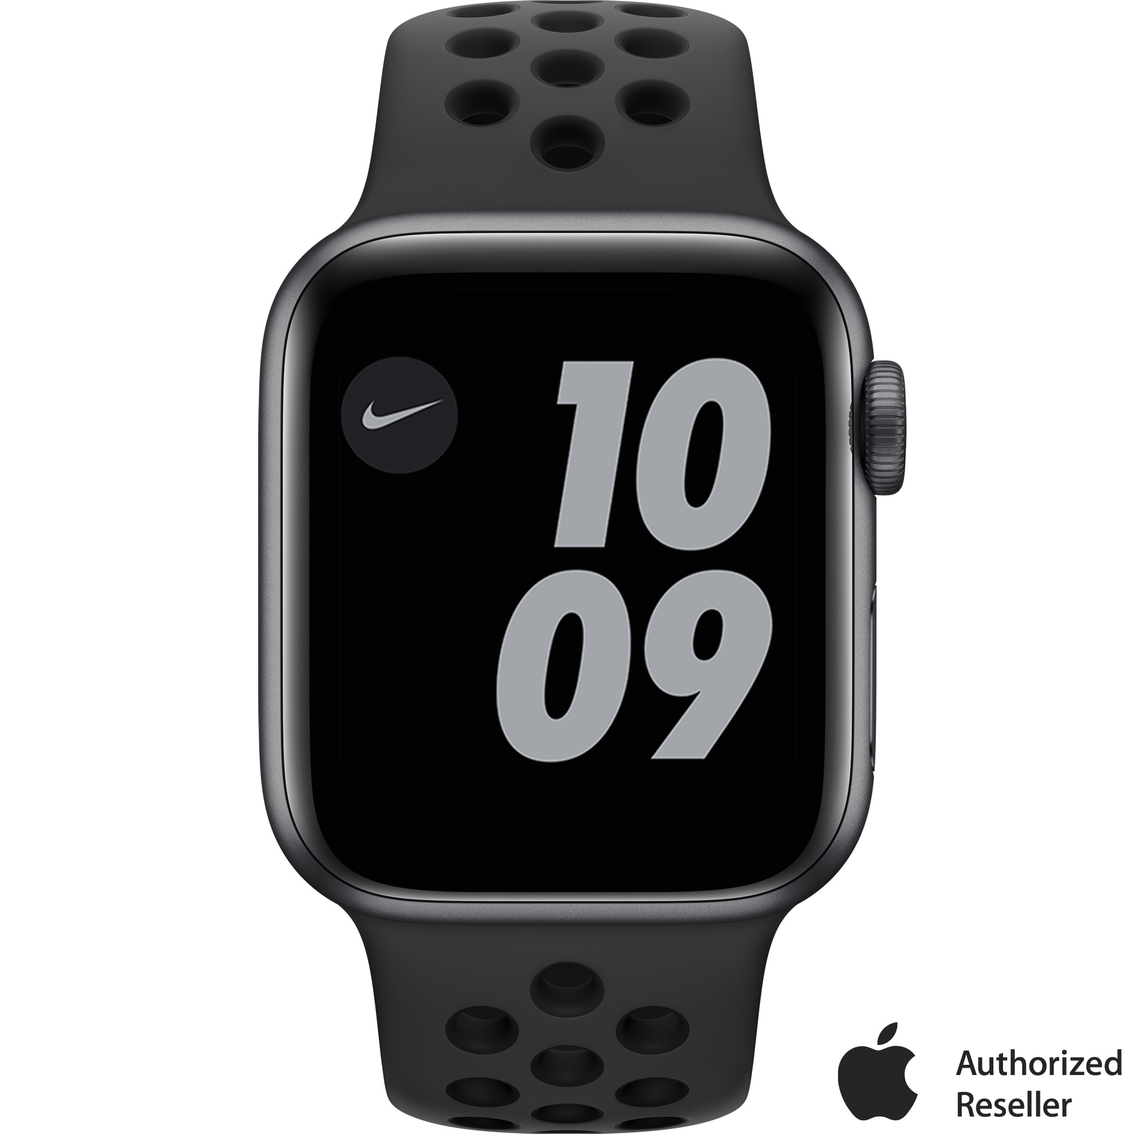 Apple Watch Nike Series 6 Gps + Cellular, 40mm Space Gray Aluminum